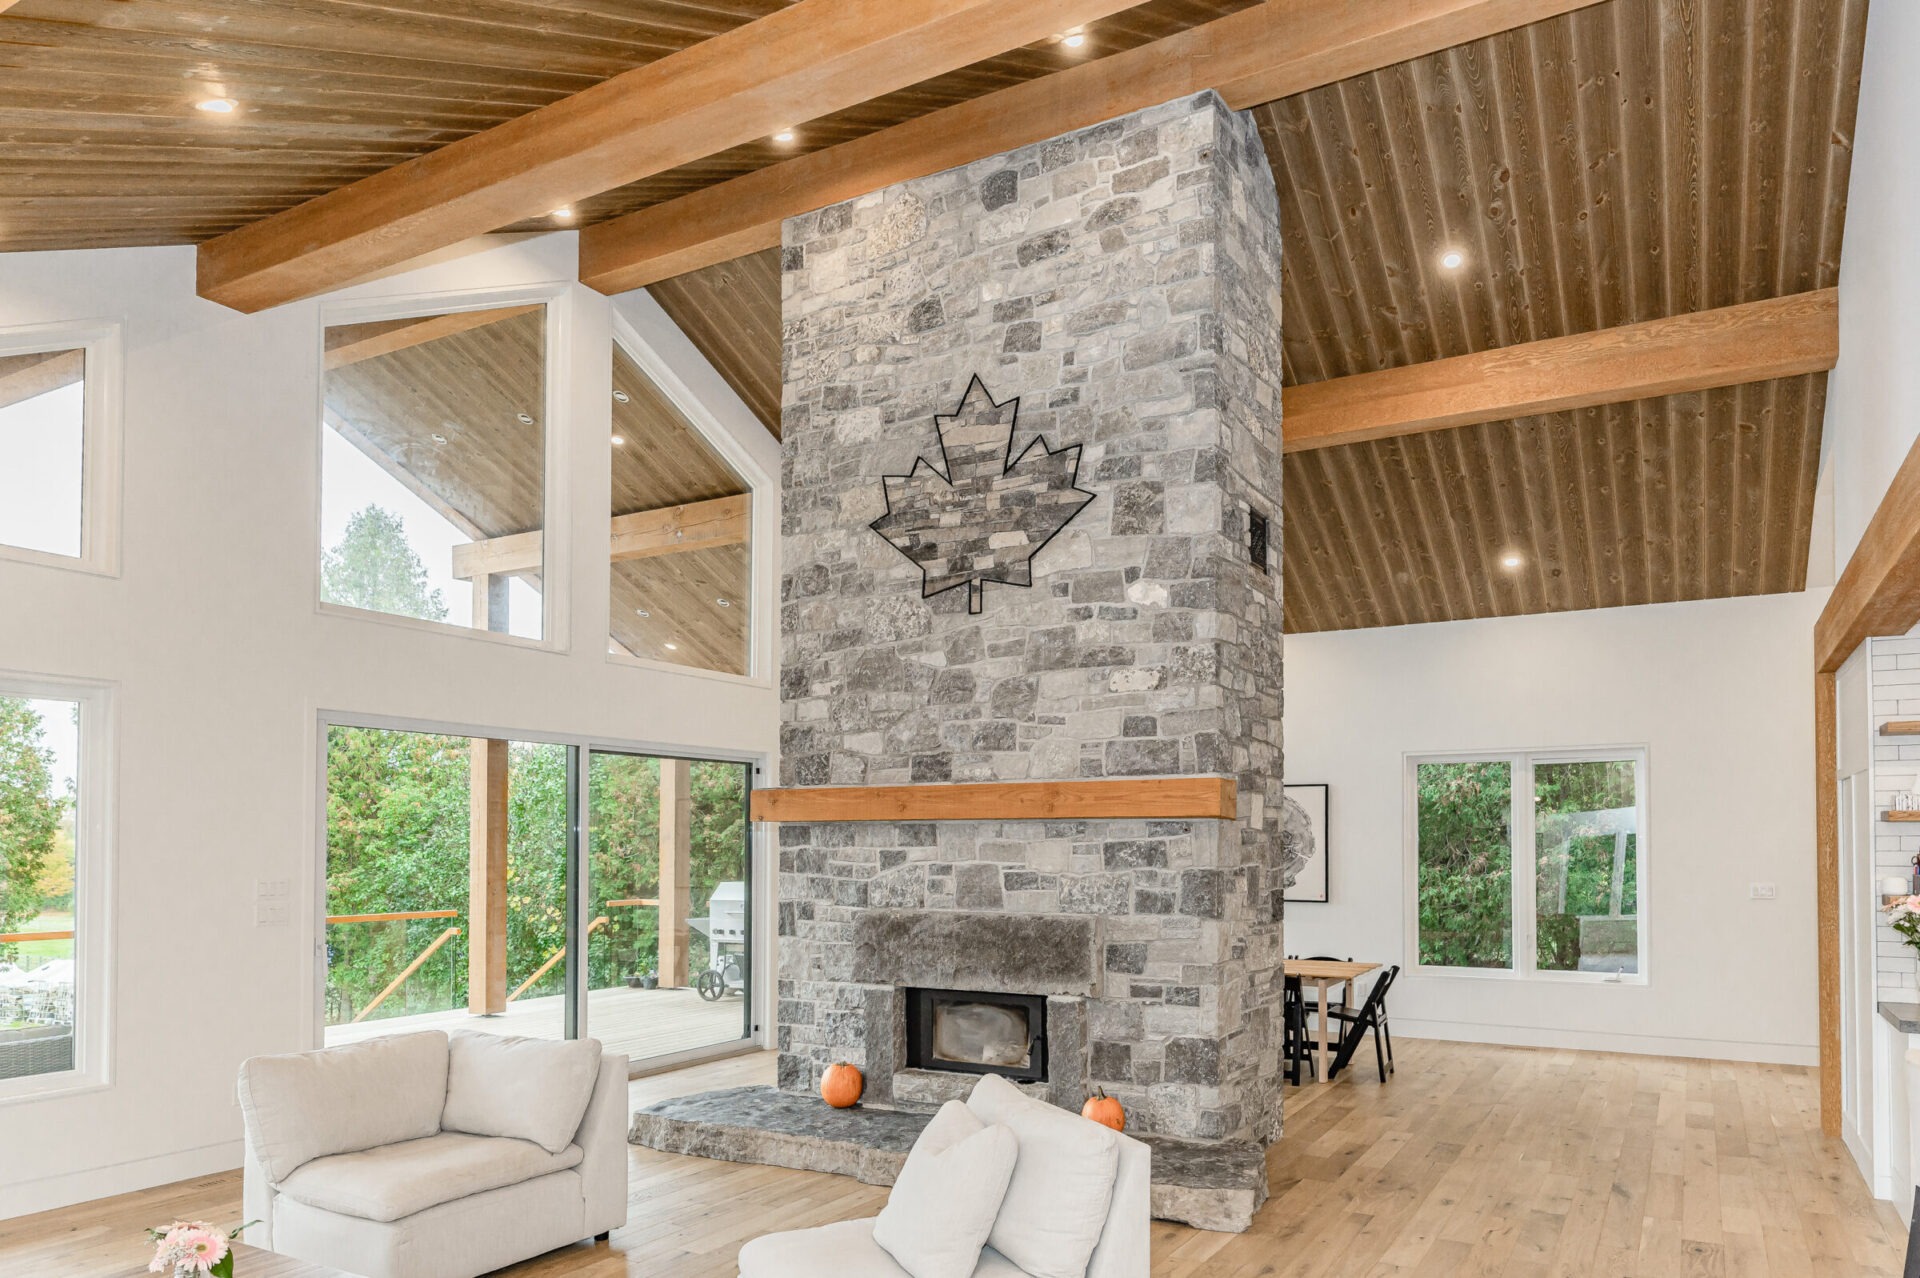 This is a bright, spacious living room with a large stone fireplace featuring a maple leaf design, wooden ceiling beams, and floor-to-ceiling windows.